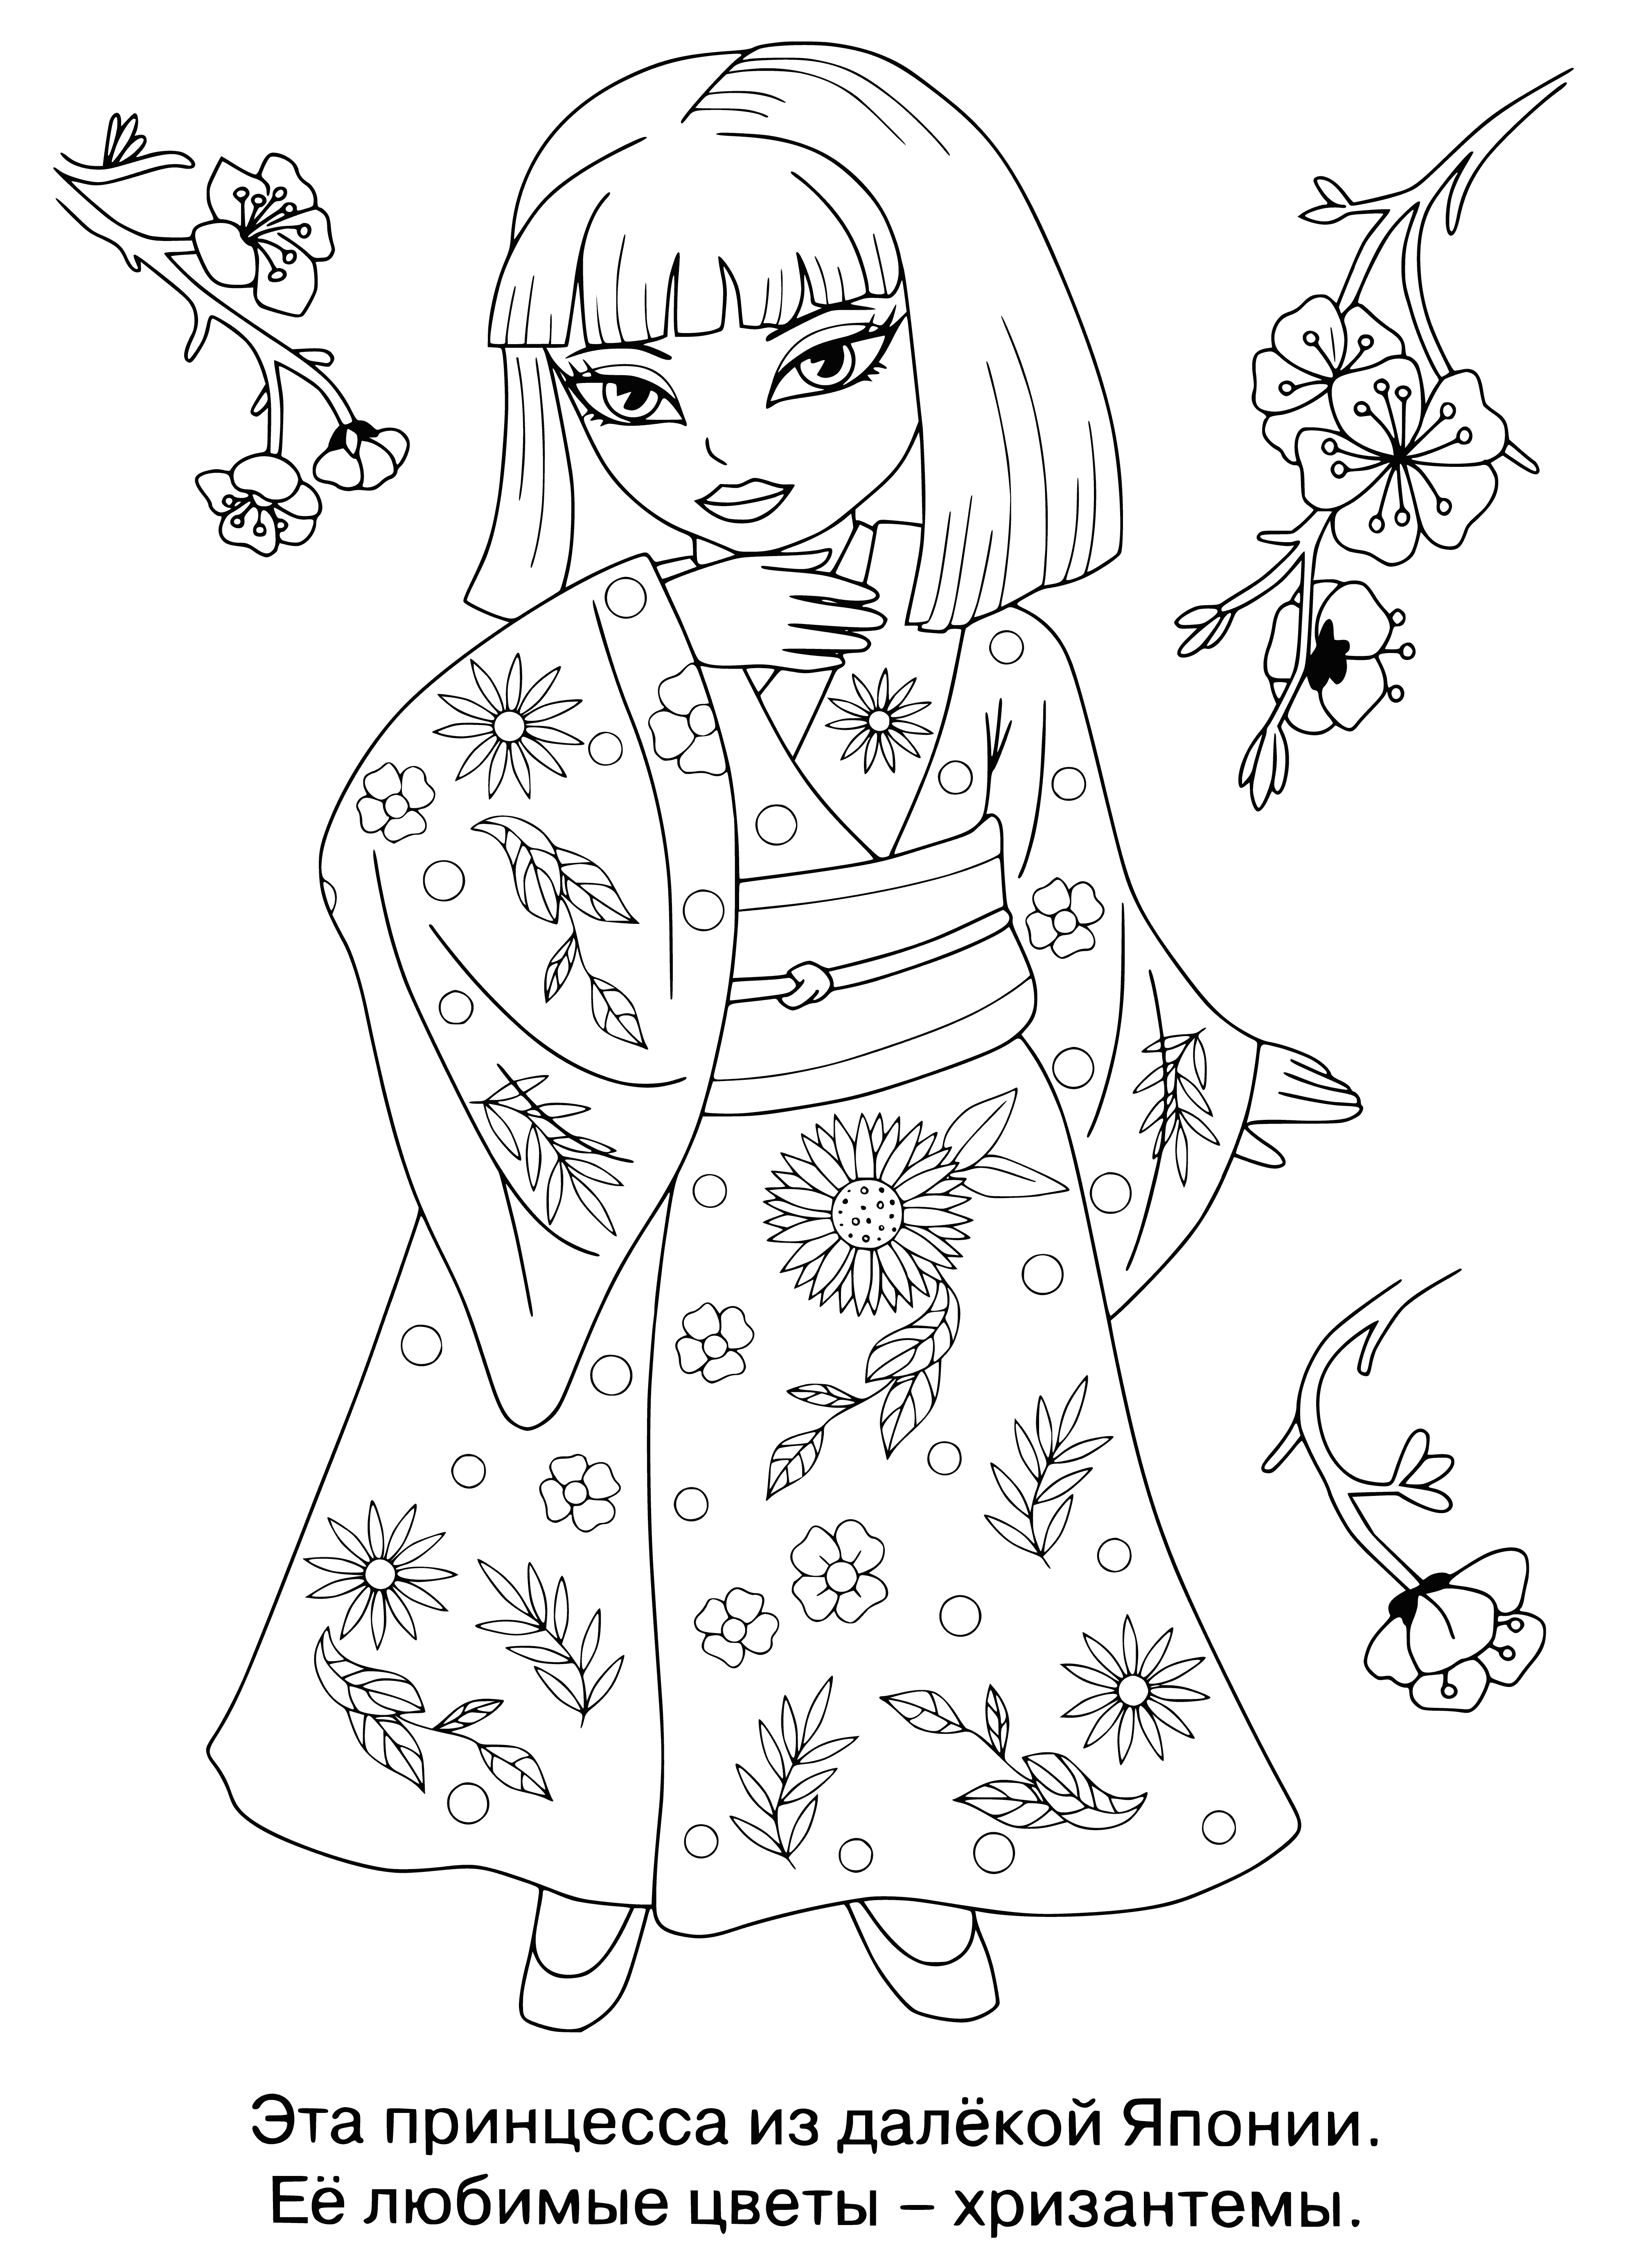 coloring page: Little princess from Japan wearing pink dress, white headband, black belt w/gold buckle, pink fan, standing in front of gate w/Japanese flag.